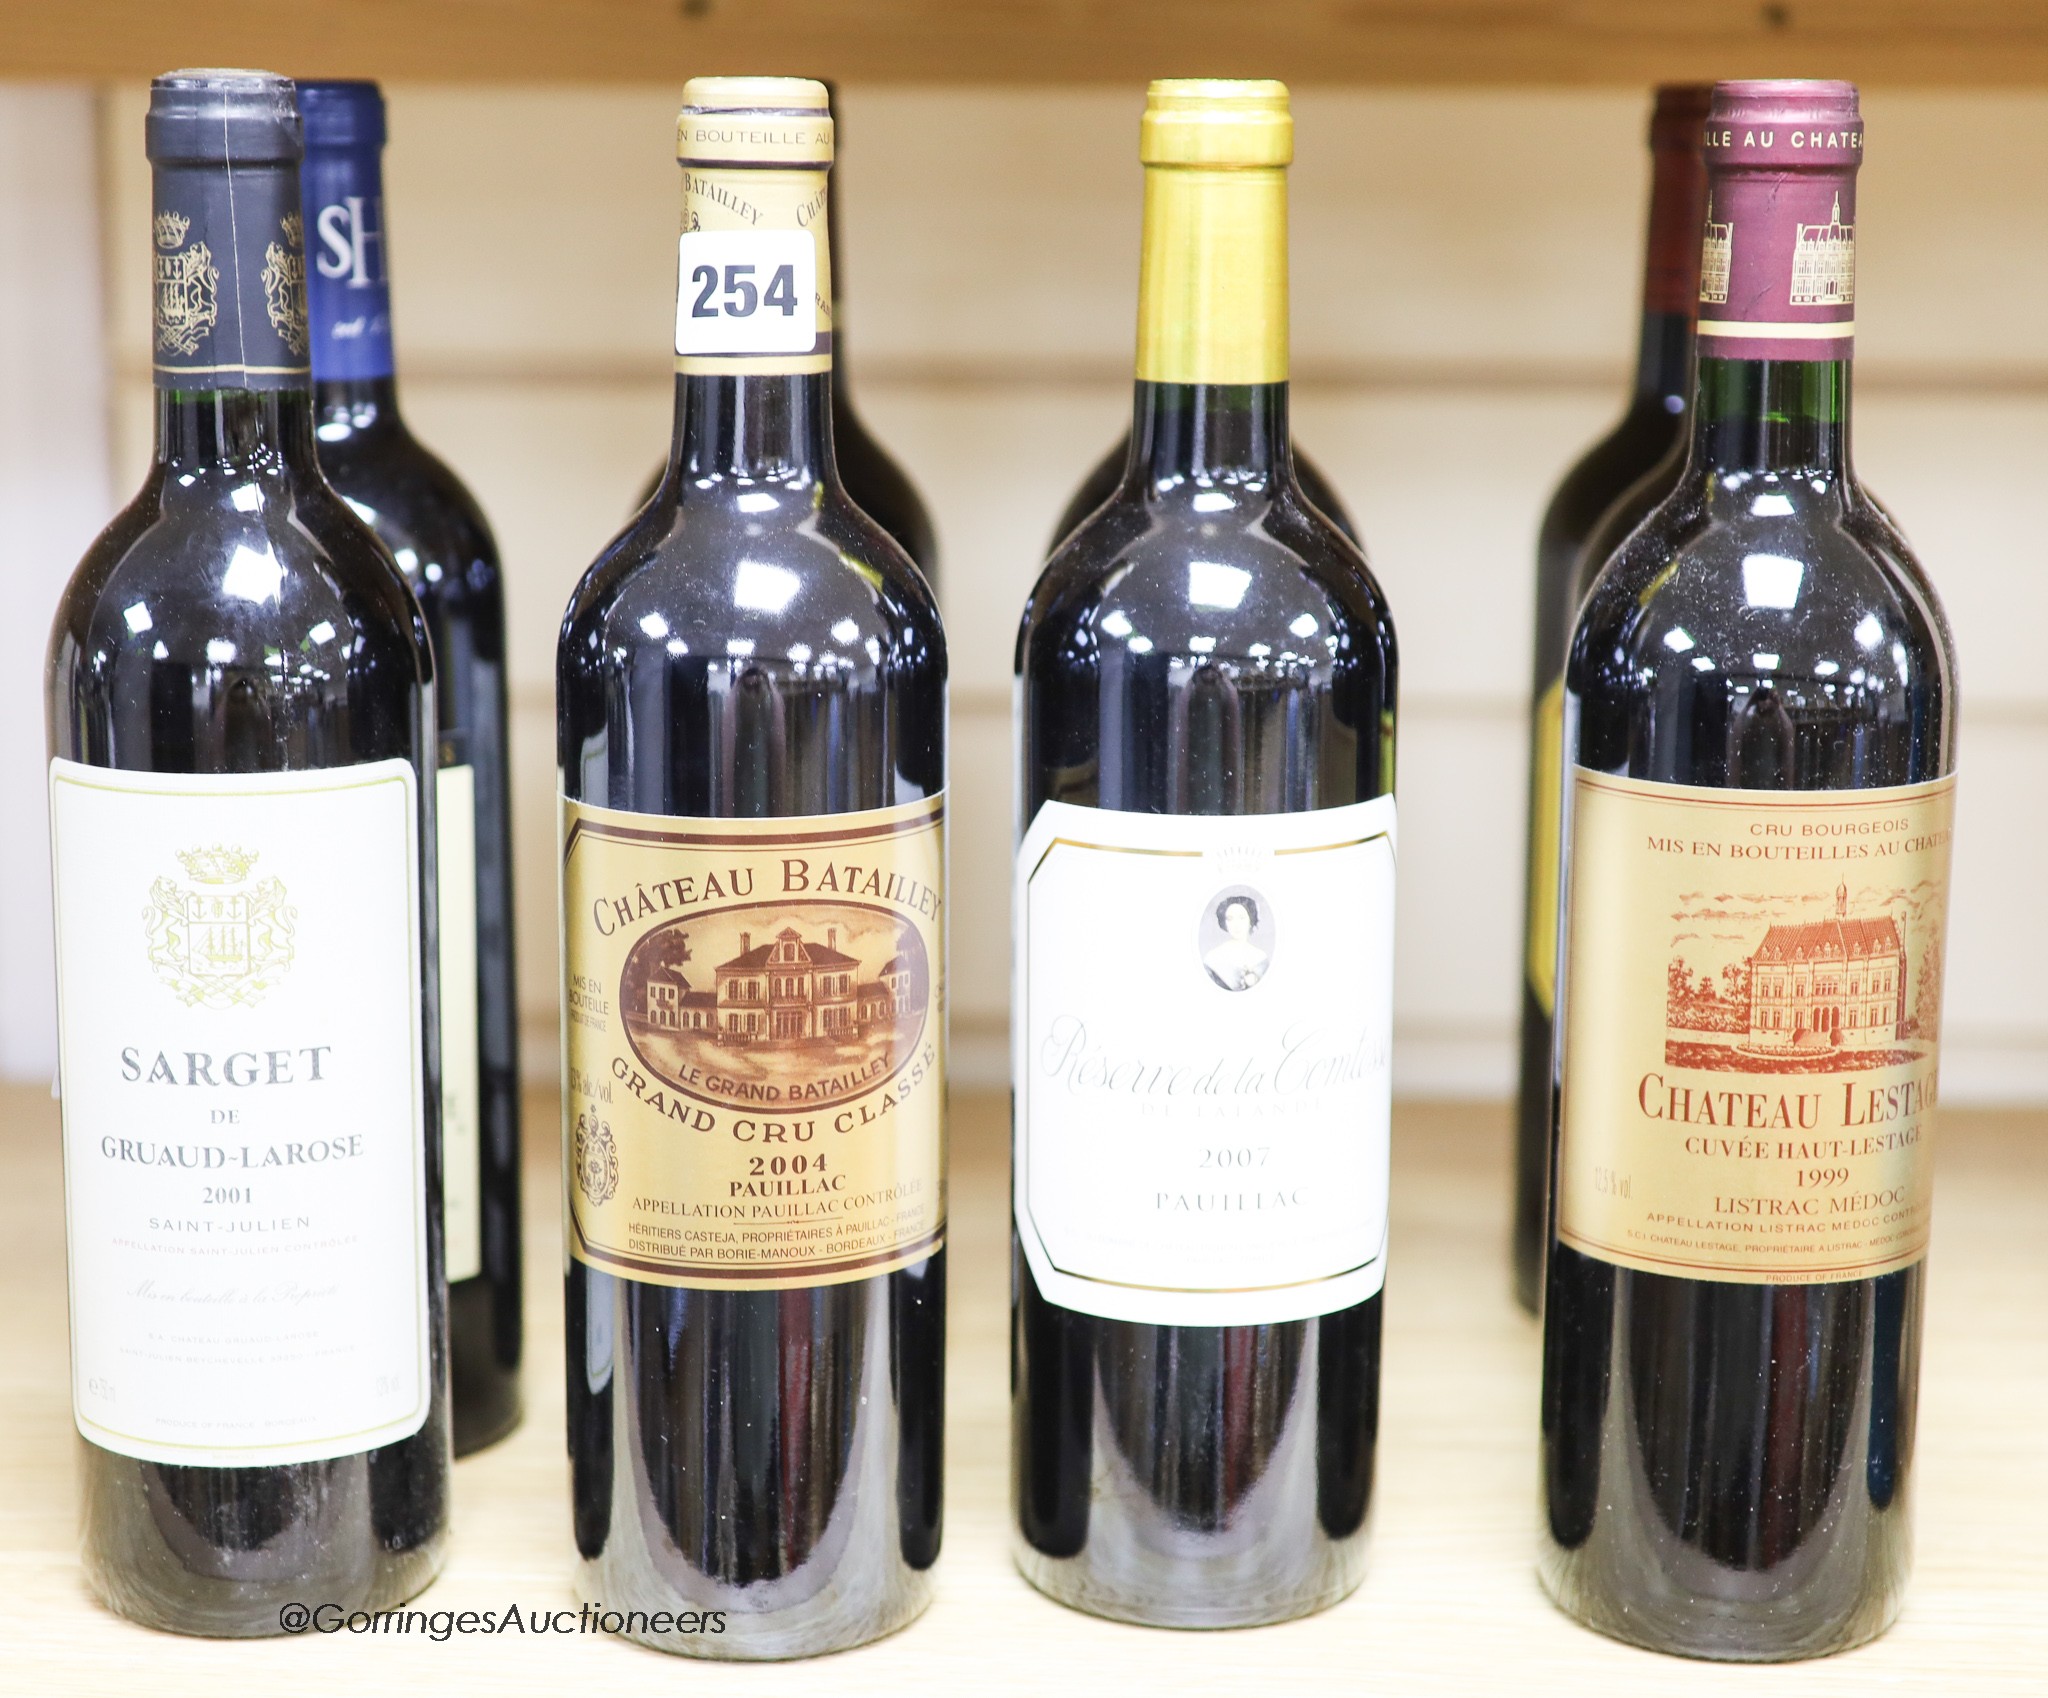 Nine assorted Bordeaux wines including two Chateau Lynch-Moussas, 2006, one Sargent de Gruaud Larose, 2001 and one Chateau Batailley, 2004.